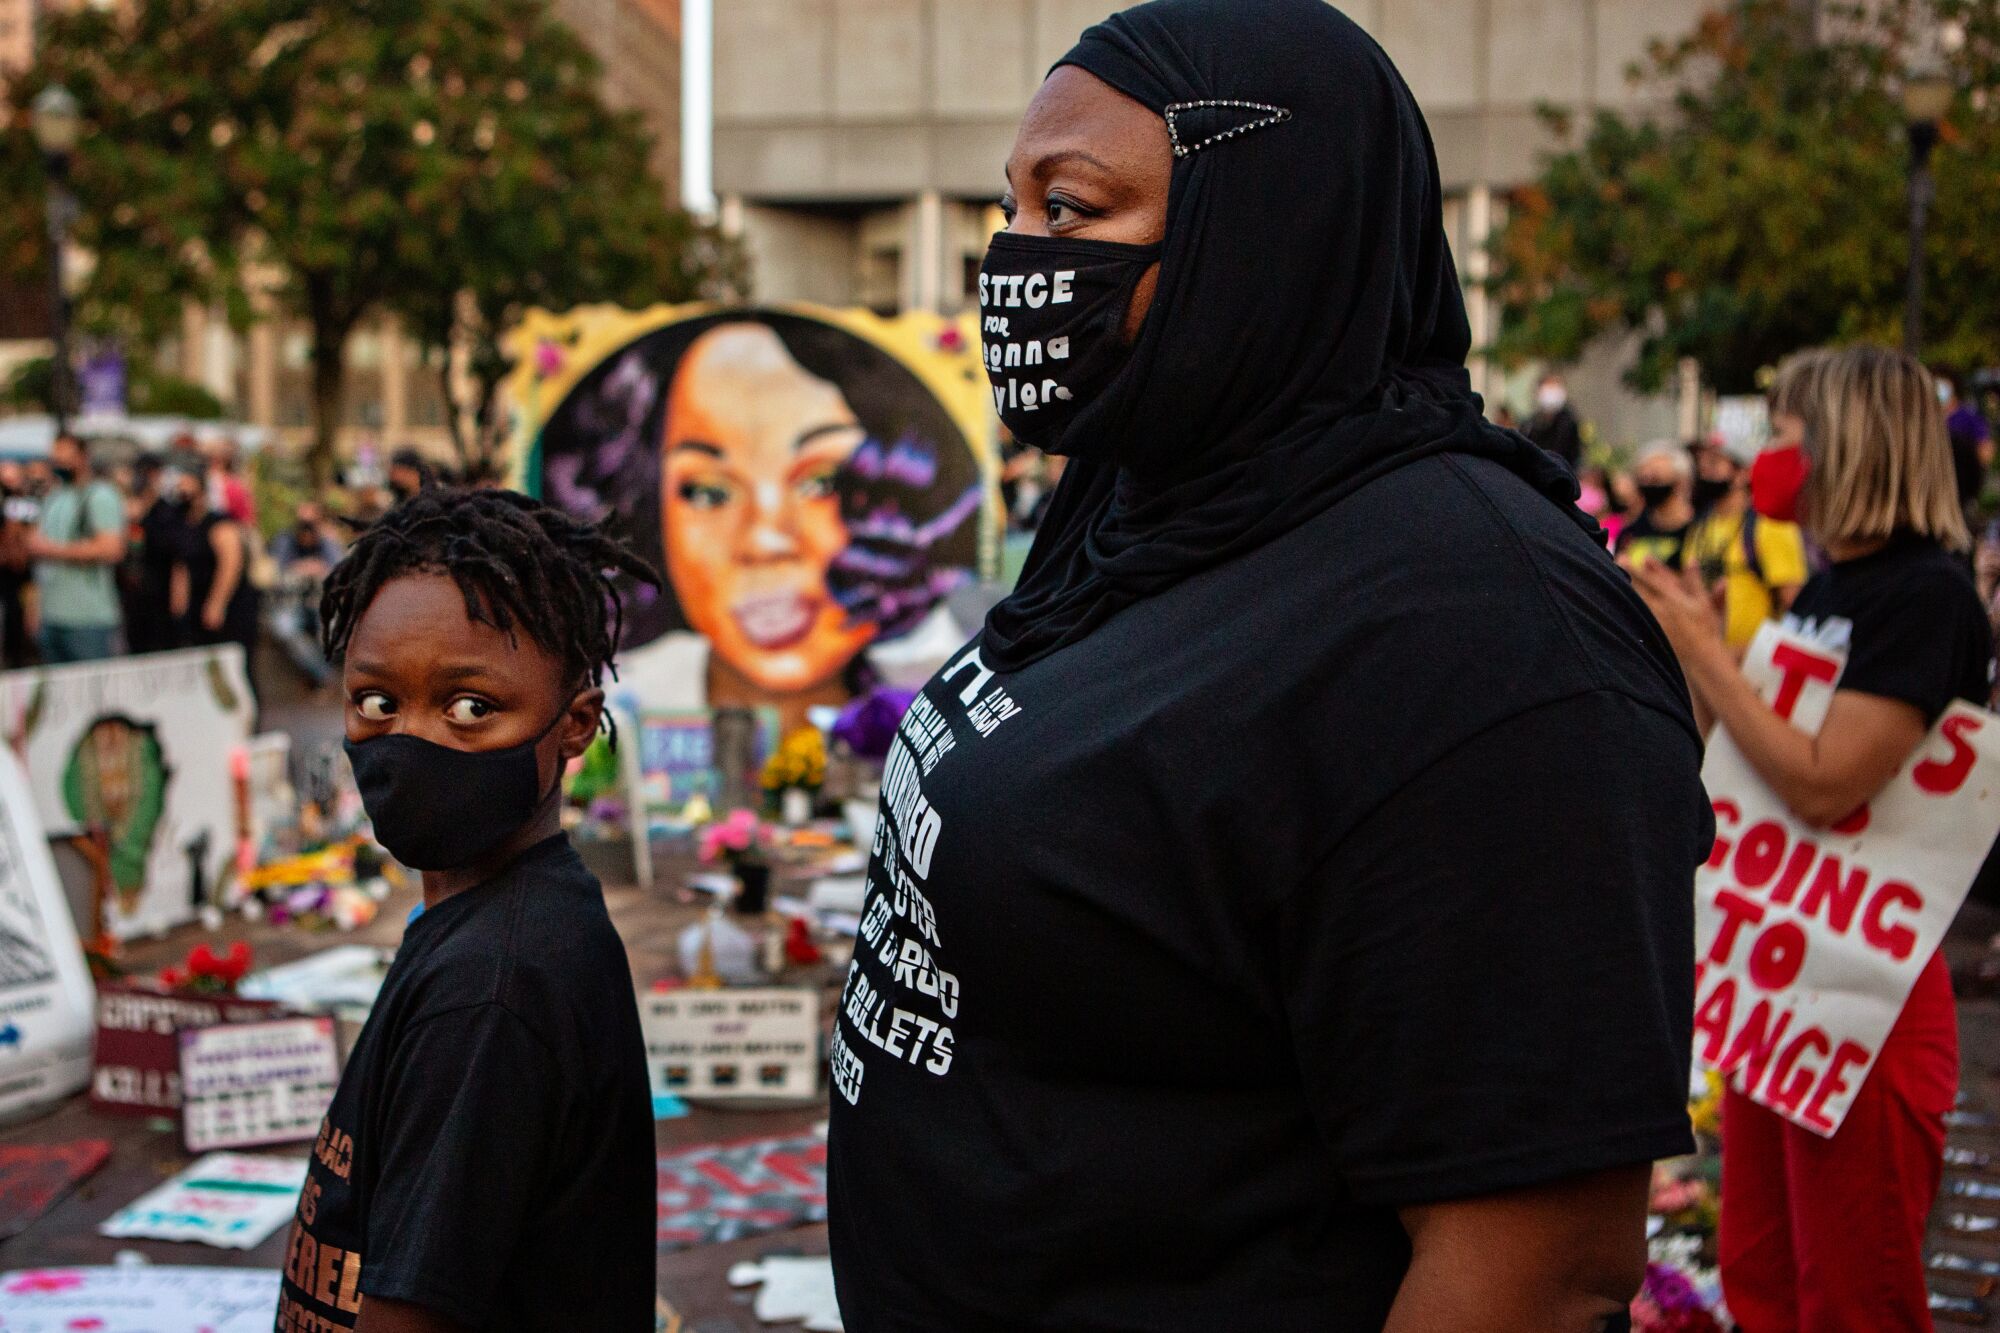 A mother and son at a Louisville demonstration.